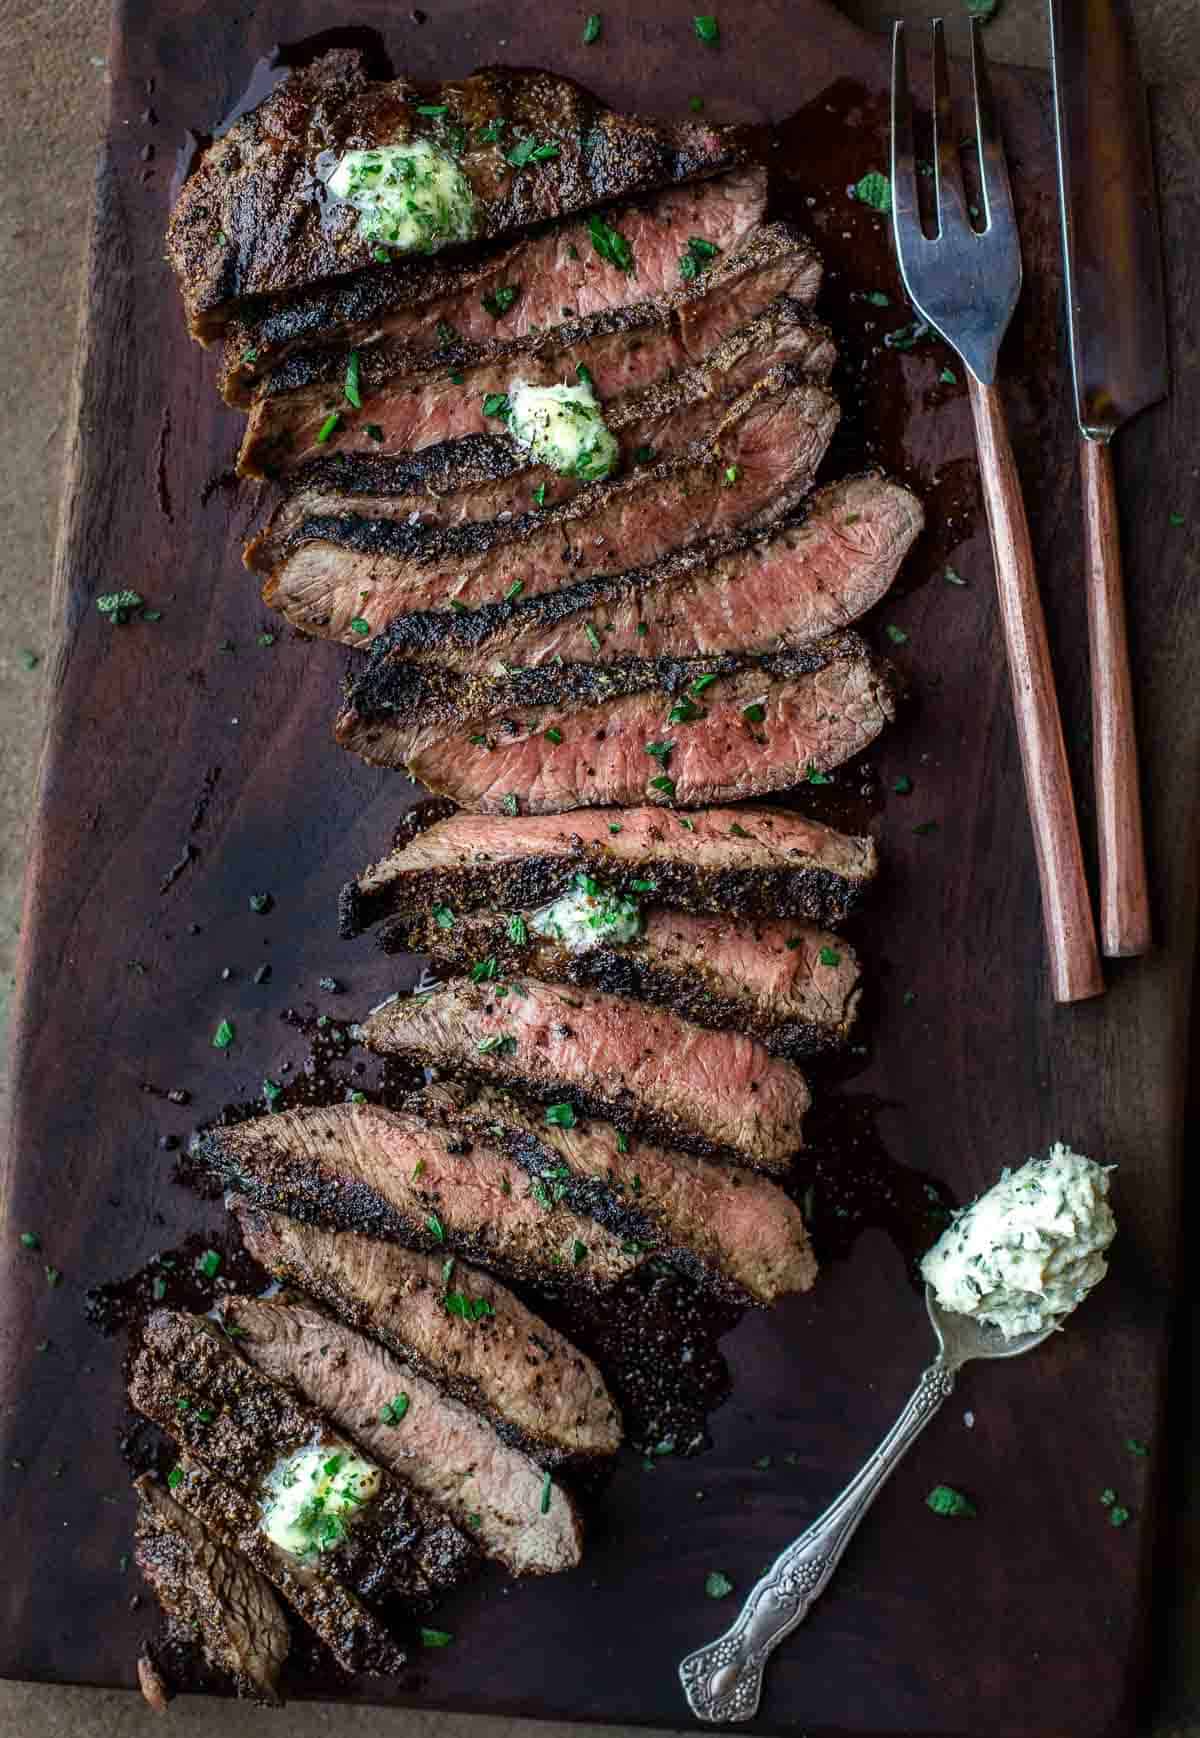 Flat iron steak with compound butter cooked to medium rare.